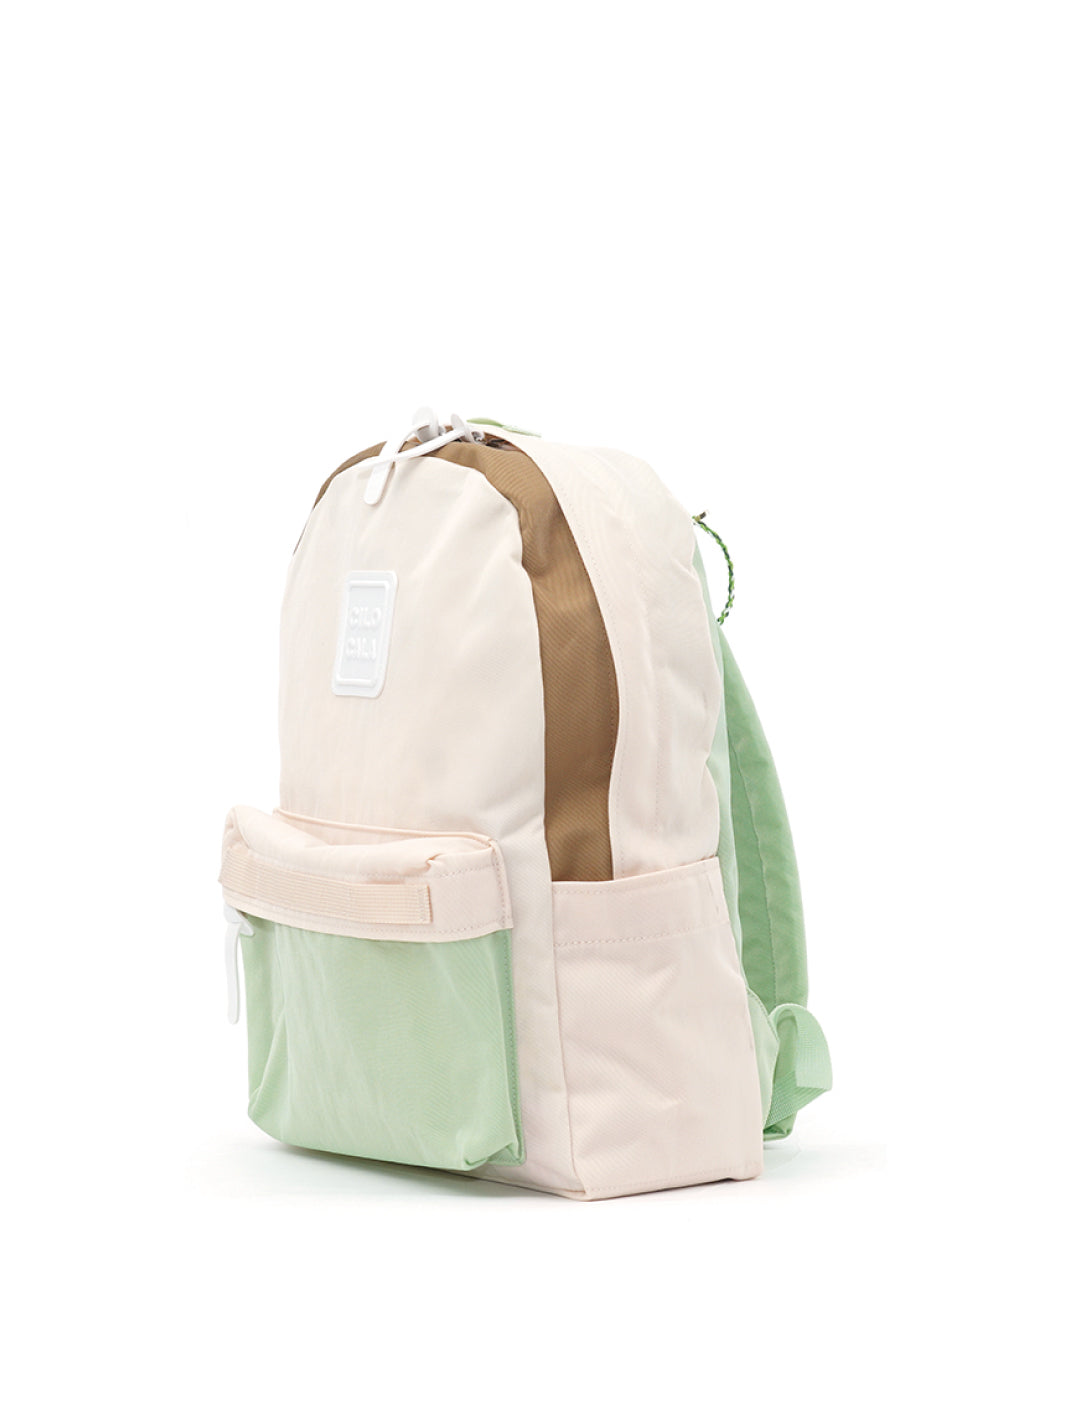 H COMBI BACKPACK (MIDDLE)